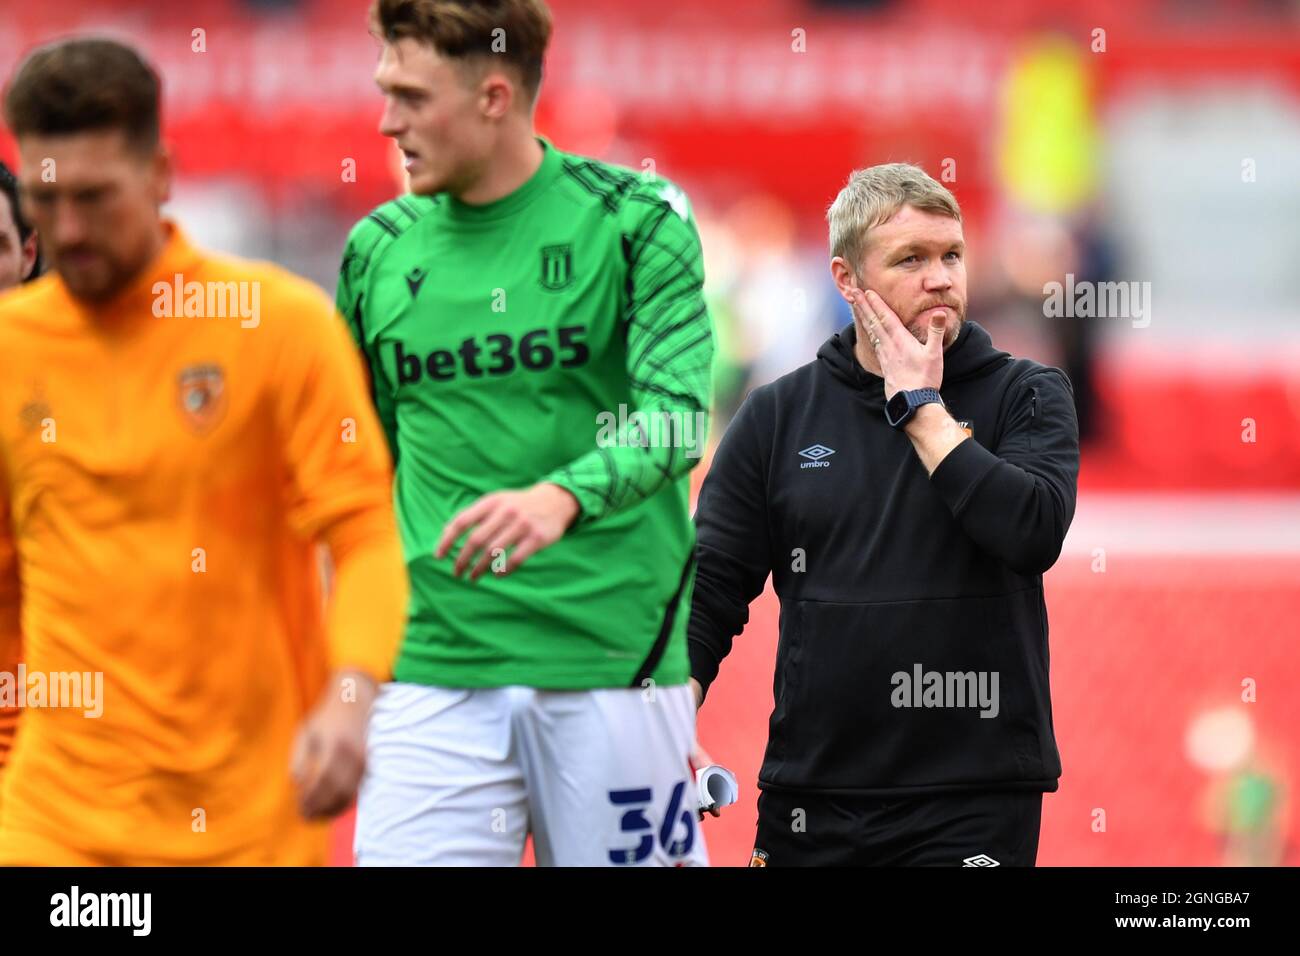 Hull City manager Grant McCann reacts after the final whistle during the Sky Bet Championship match at the bet365 Stadium, Stoke. Picture date: Saturday September 25, 2021. Stock Photo